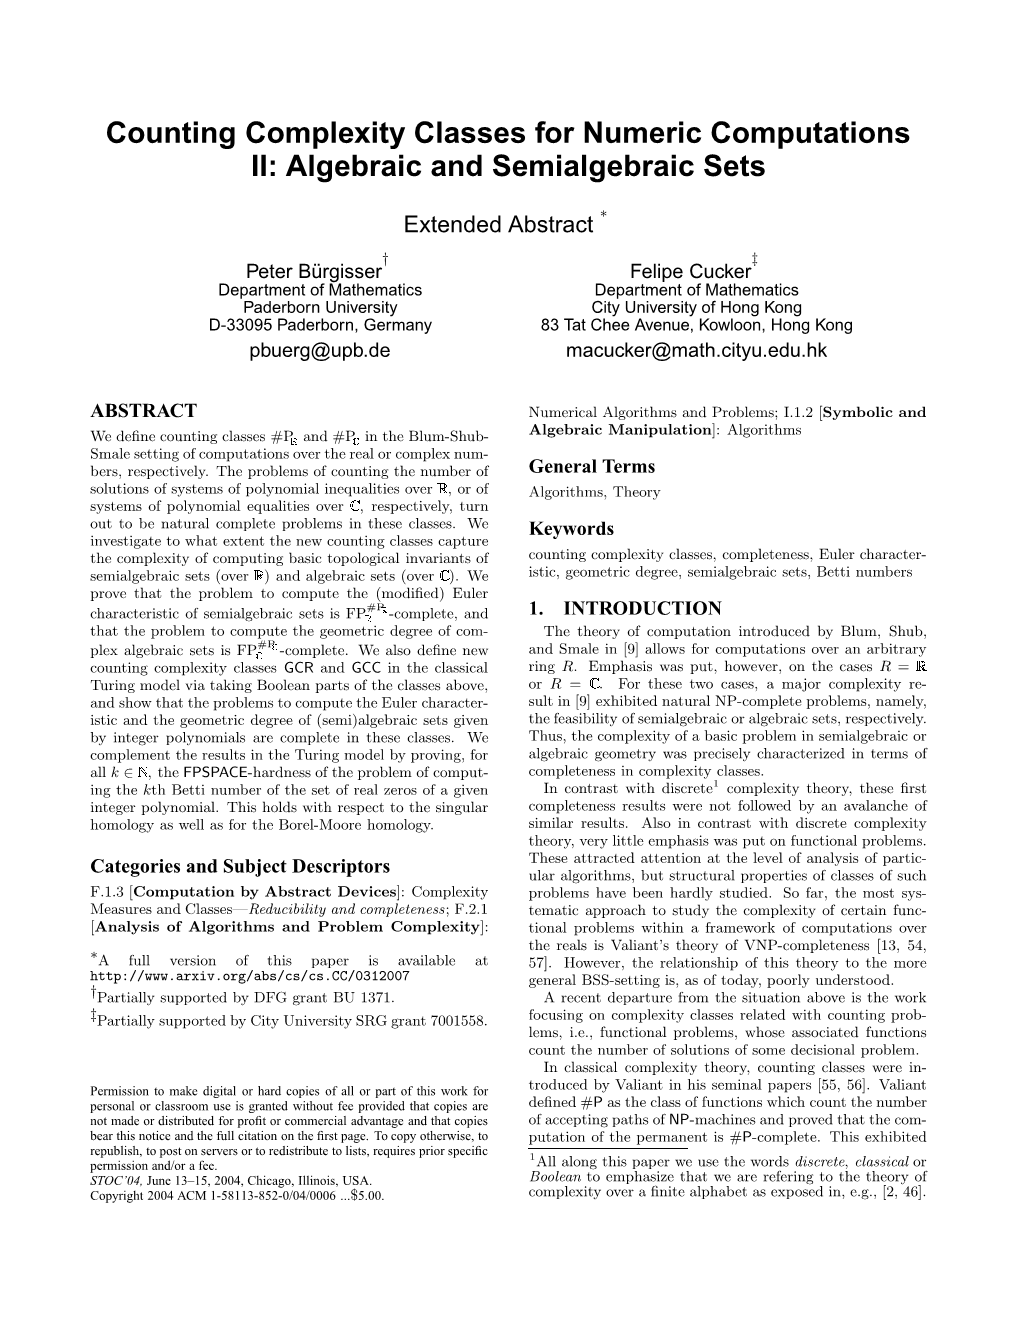 Counting Complexity Classes for Numeric Computations II: Algebraic and Semialgebraic Sets